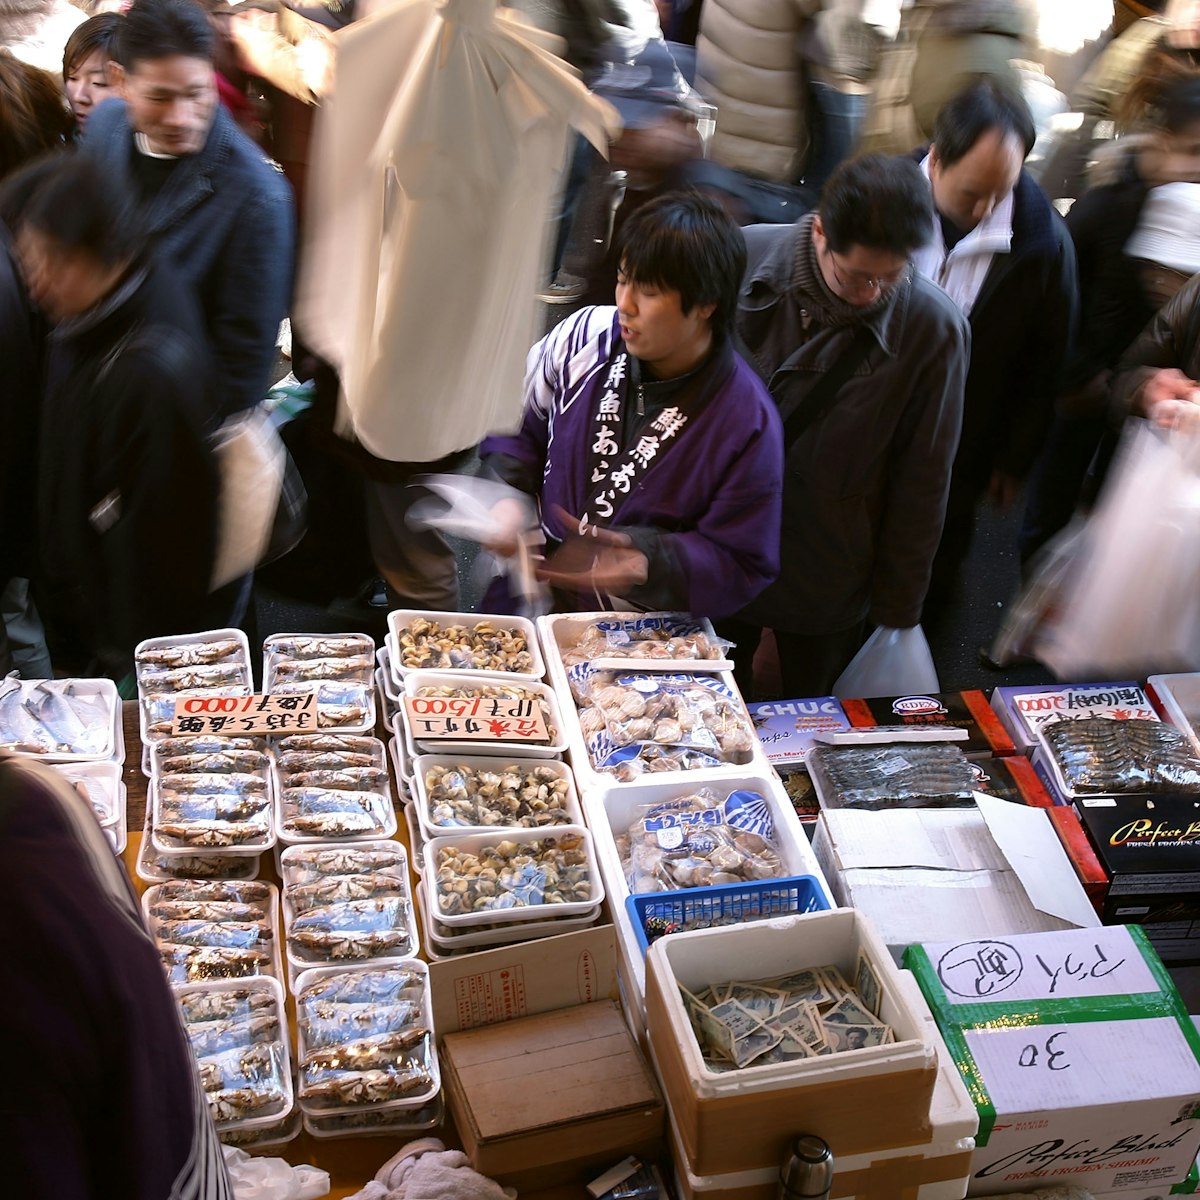 TOKYO - DECEMBER 31:  A fishmonger sells seafood at a fish stall in the Ameya Yokocho street market on December 31, 2008 in Tokyo, Japan. People shop around in preparation to celebrate the New Year holidays at the market featuring over 500 stalls, which sell various products such as fresh fish, dried food, vegetables, fruits, spices, clothes, bags and cosmetics on the narrow street.  (Photo by Kiyoshi Ota/Getty Images)